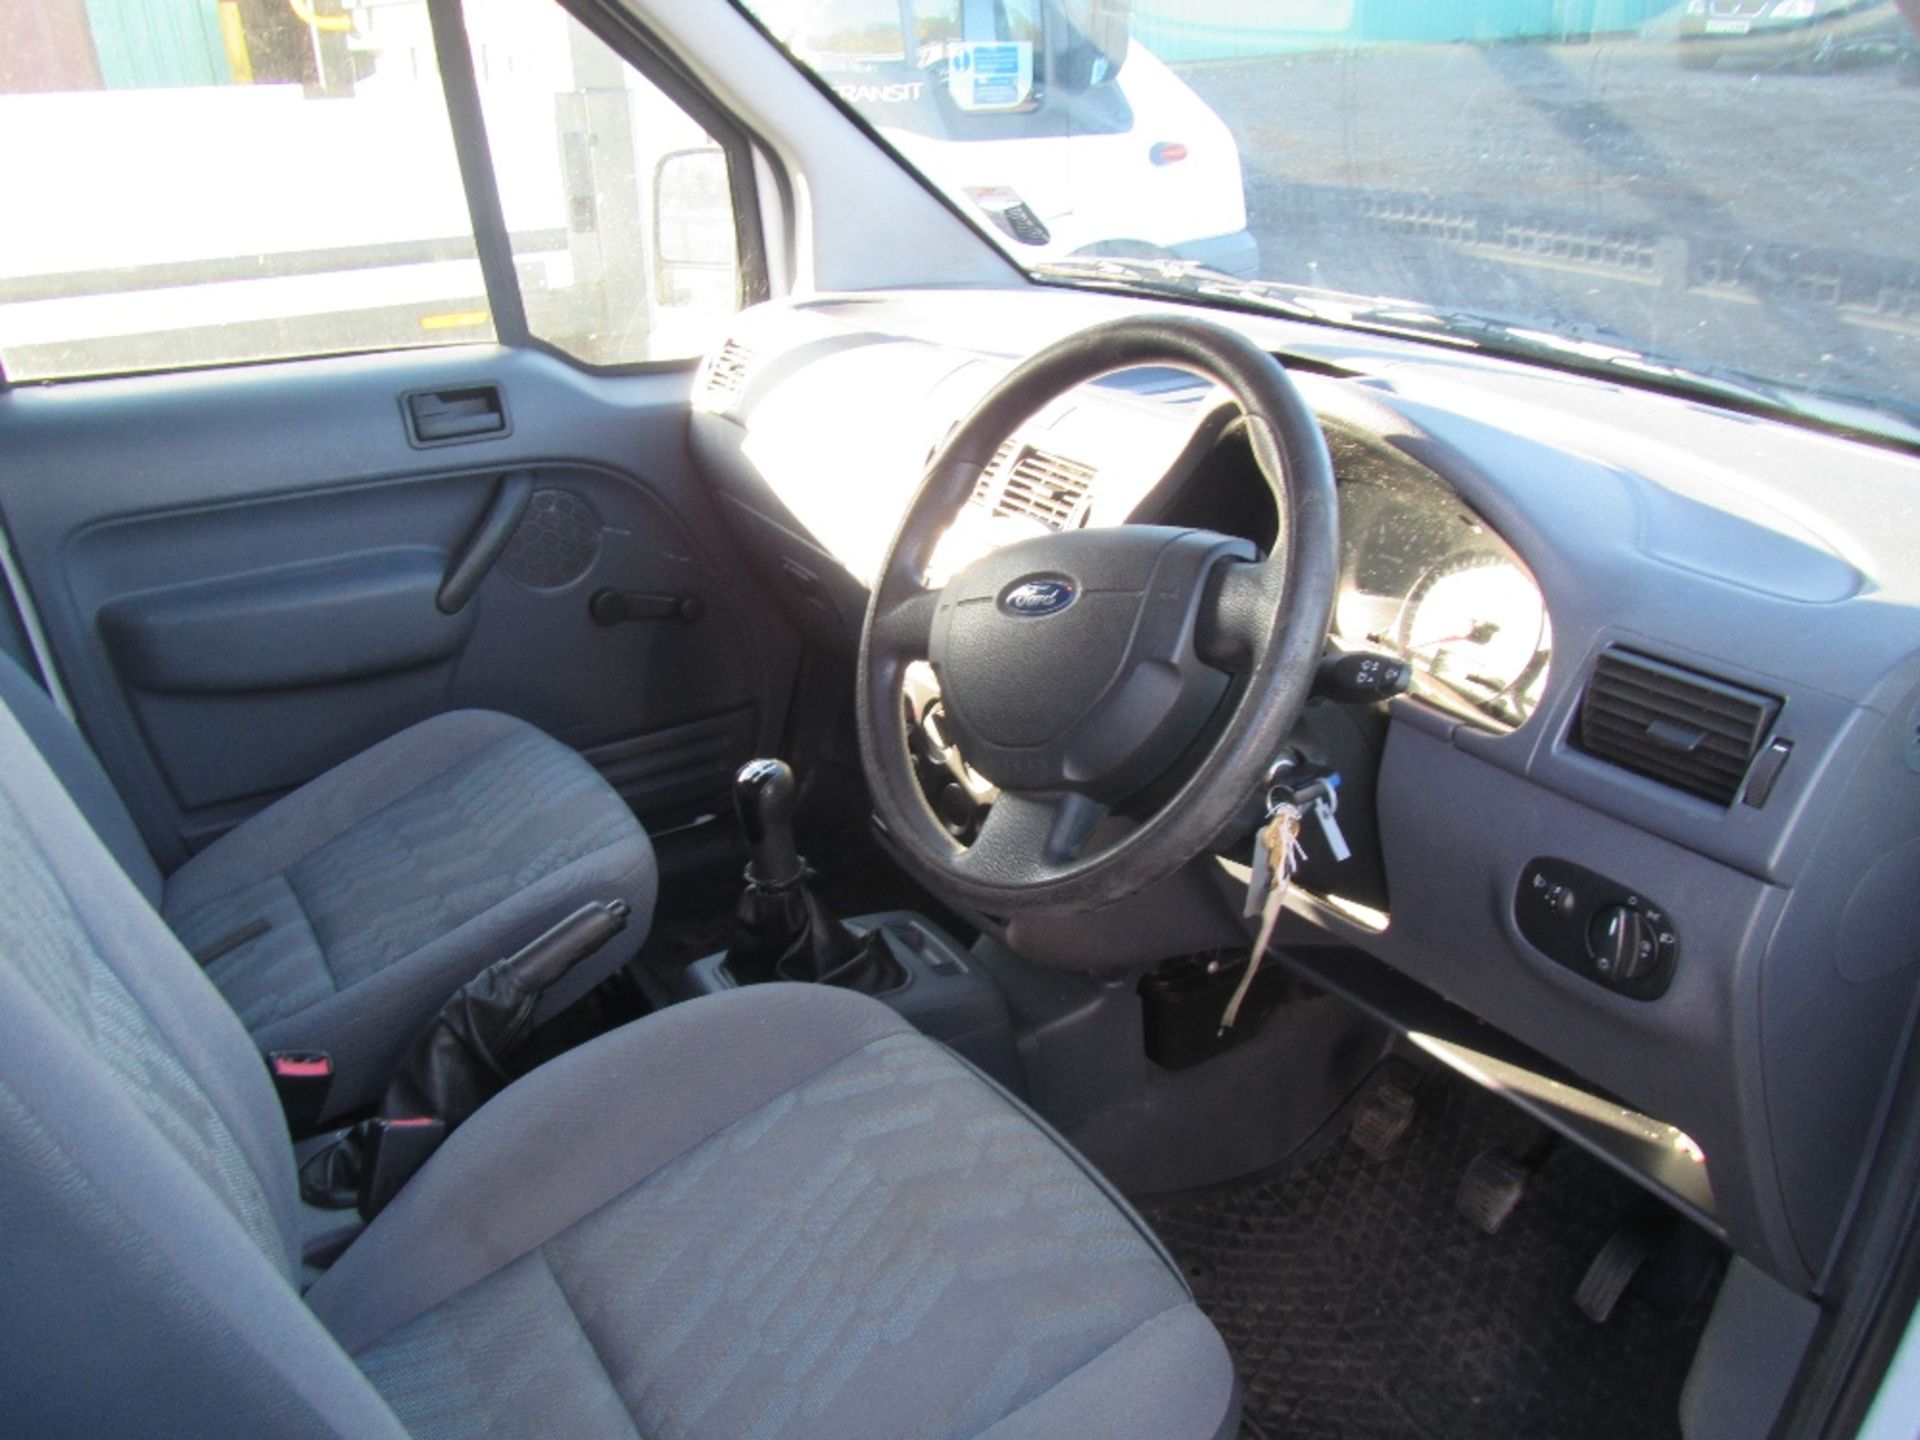 2007 Ford Transit Connect L90 T220 TDCI 5 Speed Manual Panel Van. Reg Docs will be supplied. - Image 5 of 6